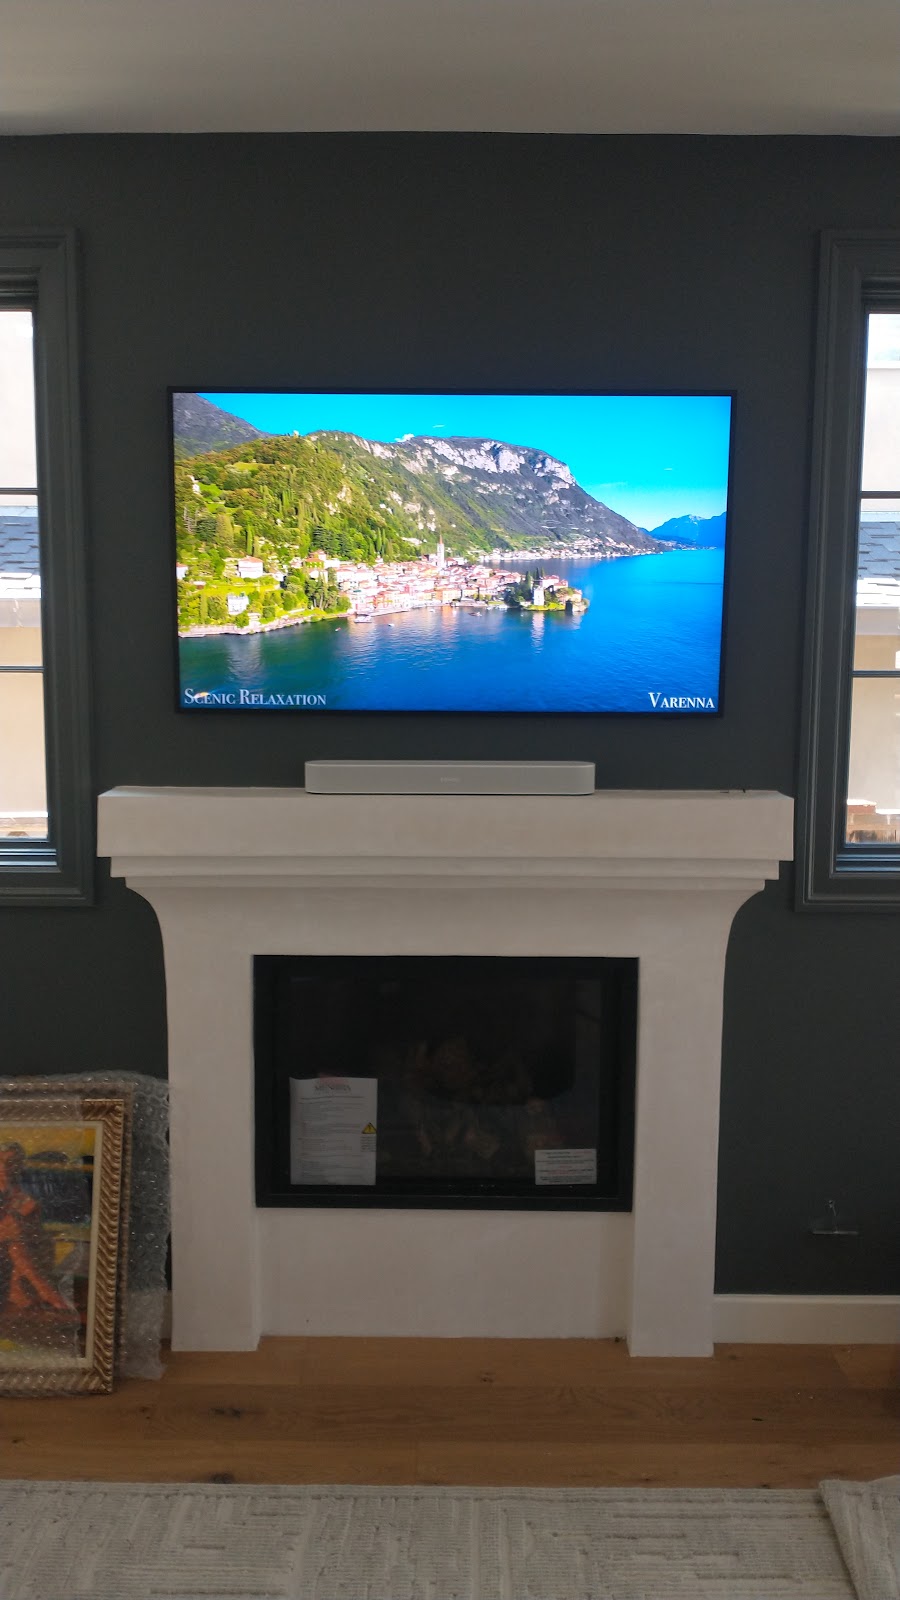 Well Install It! Home Theaters | 10 Edgewood Dr, Woodacre, CA 94973 | Phone: (415) 235-8094